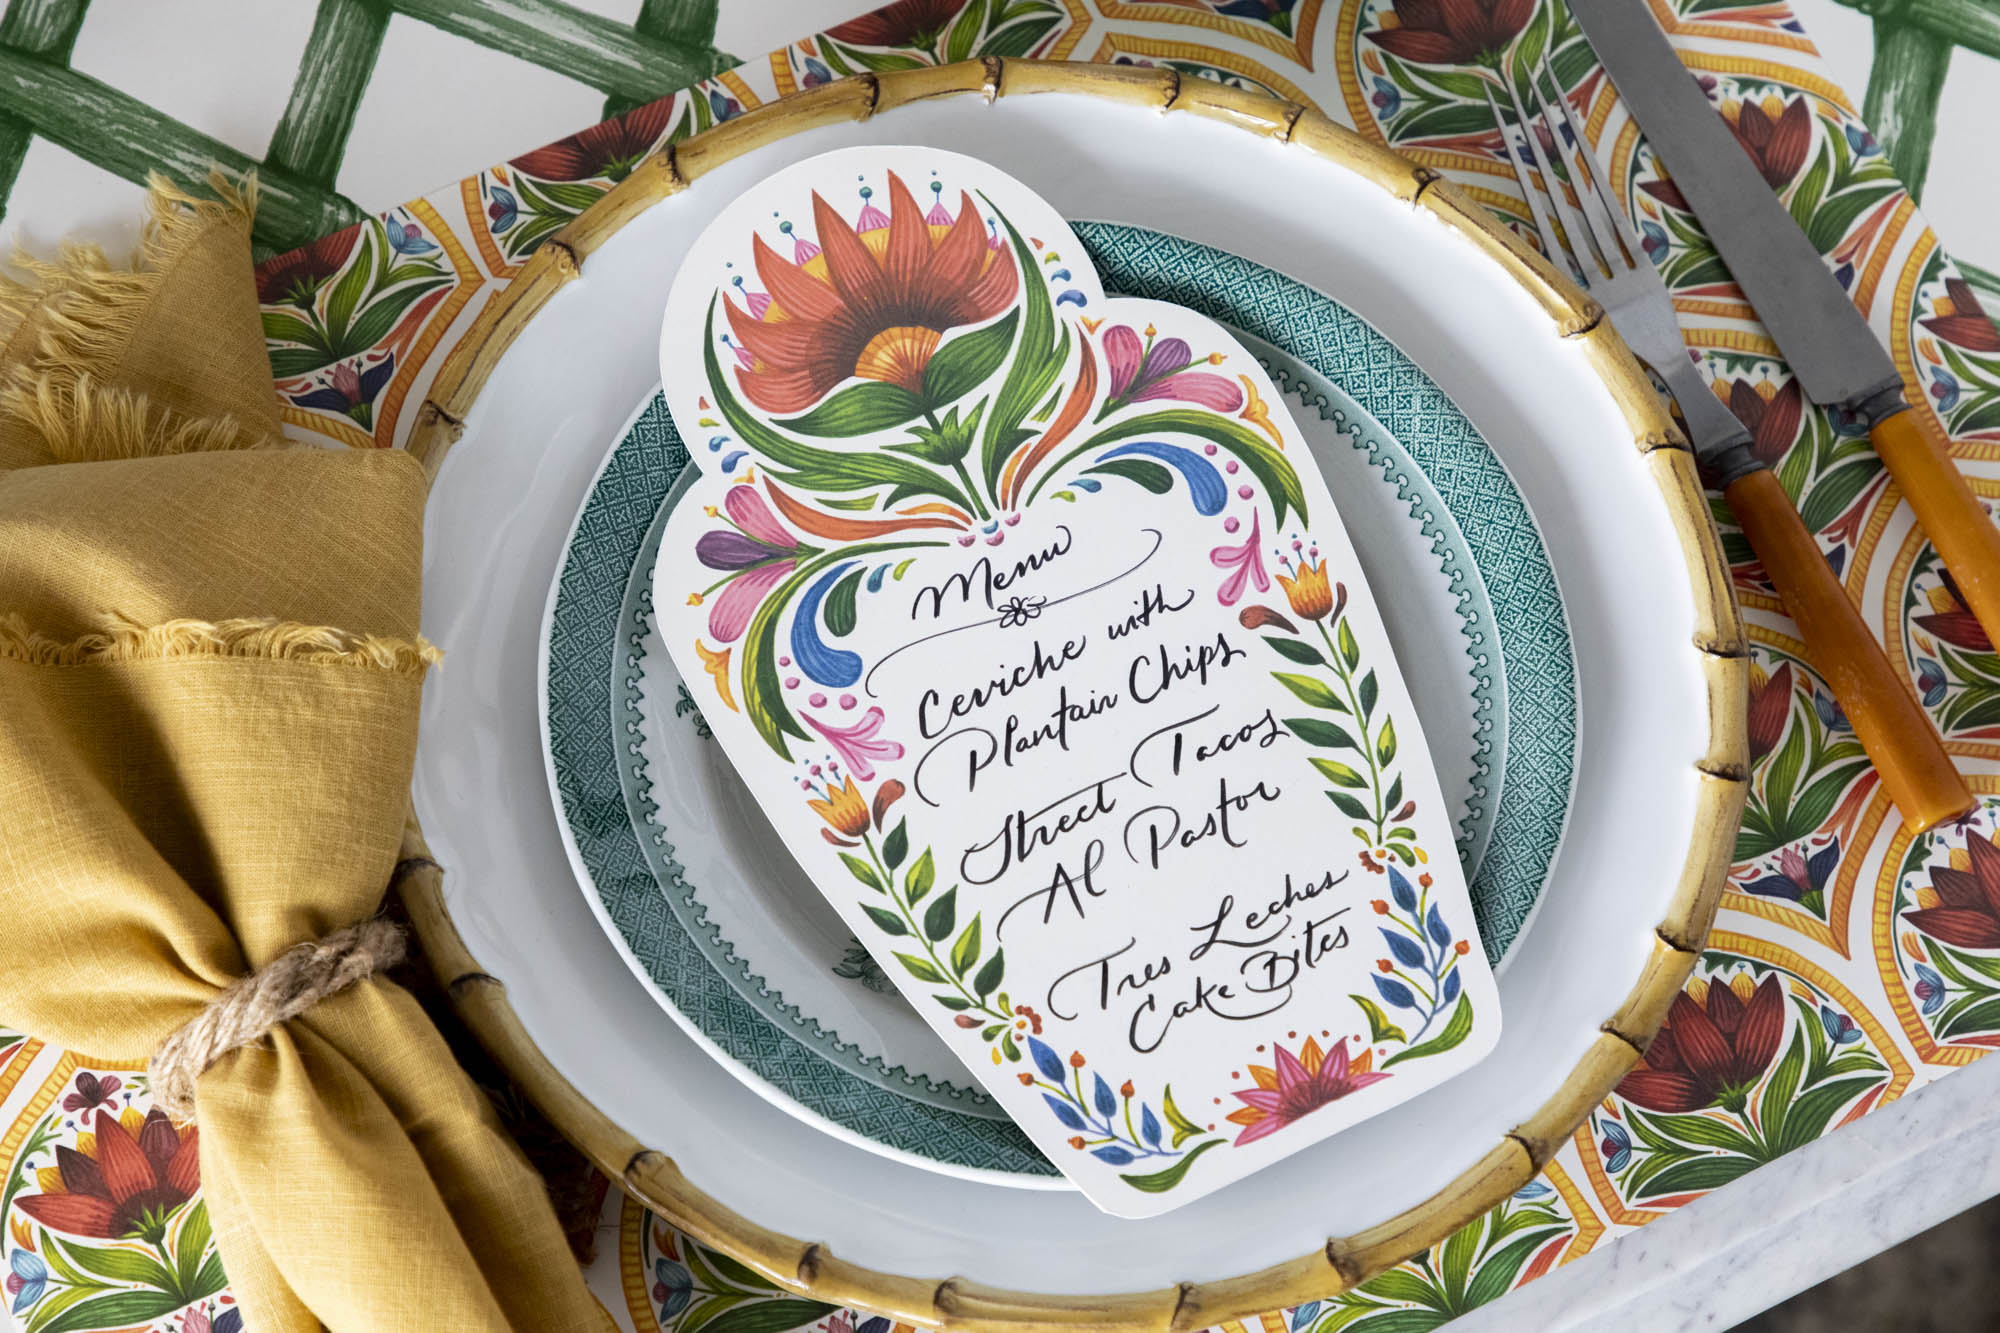 Close-up of a festive place-setting over the Fiesta Floral Tile Placemat.